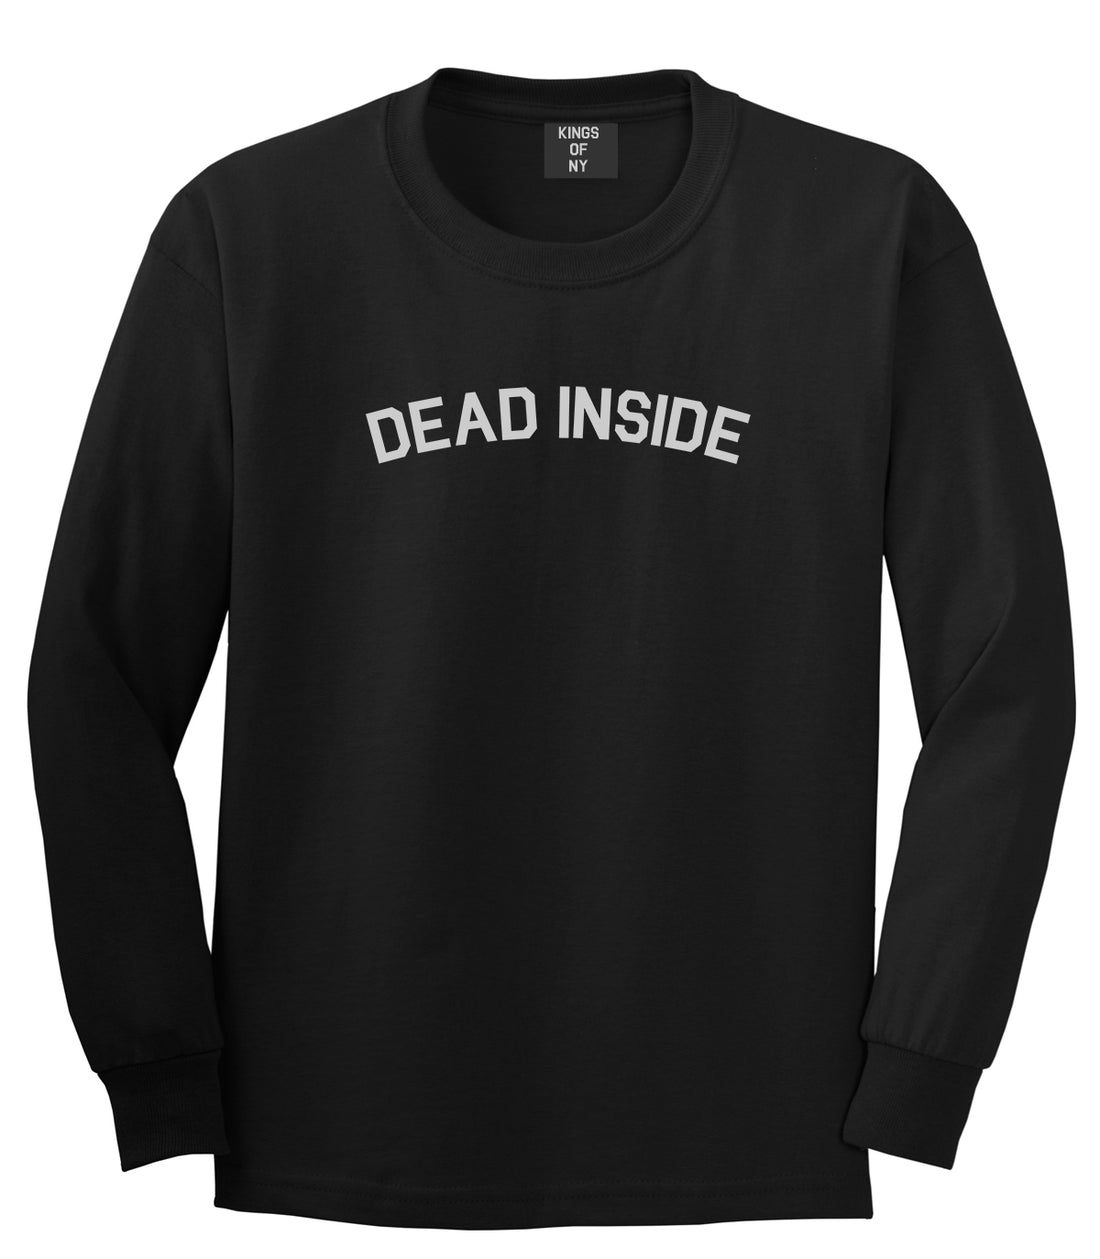 Dead Inside Arch Mens Long Sleeve T-Shirt Black by Kings Of NY